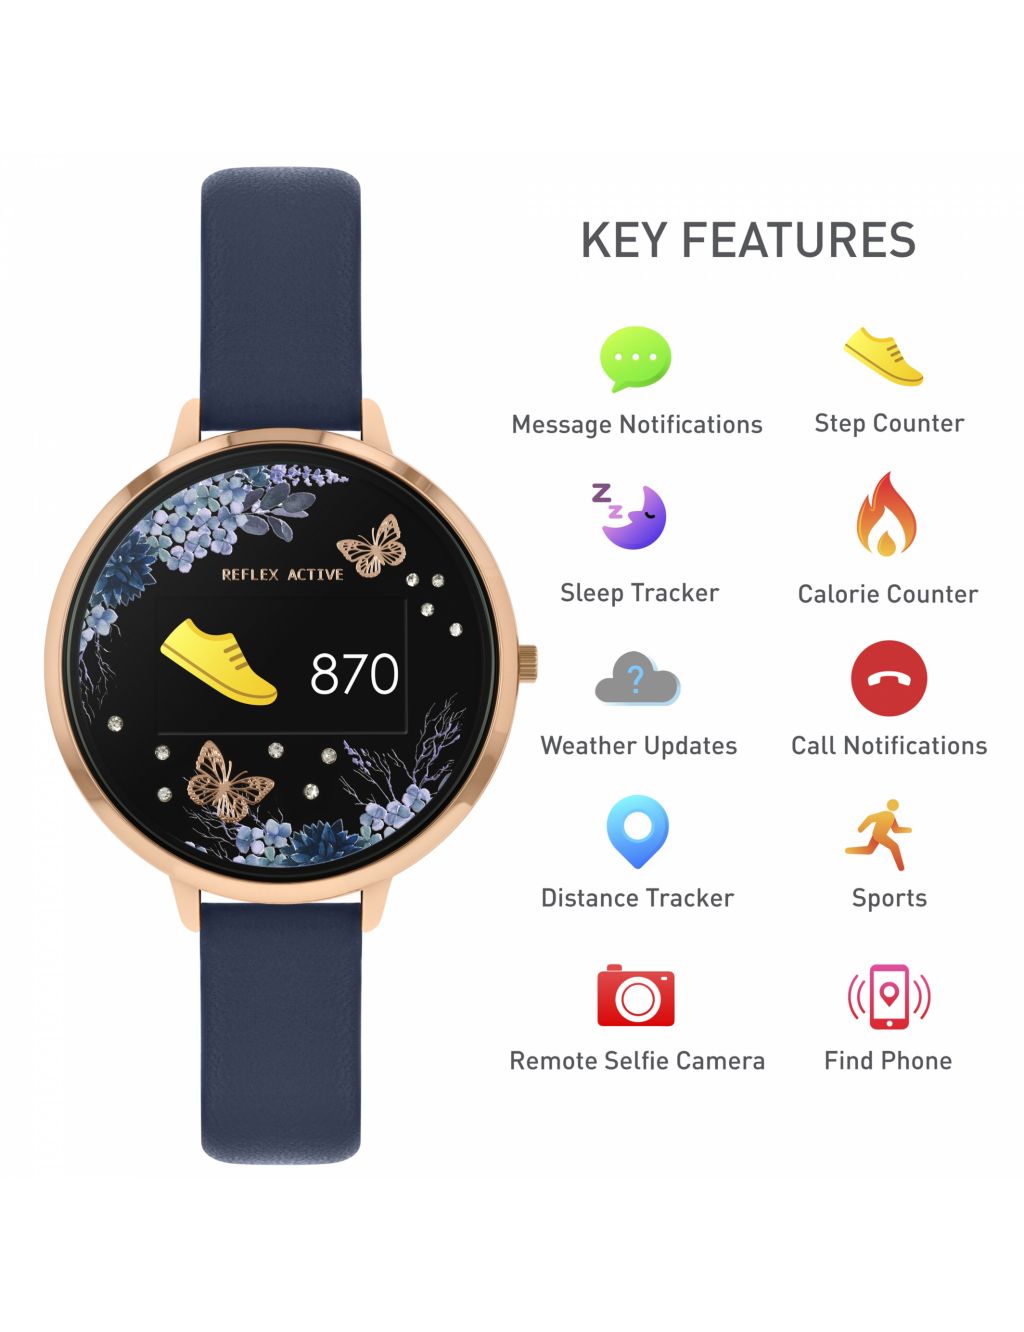 Reflex Active Fitness Blue Leather Smartwatch image 2